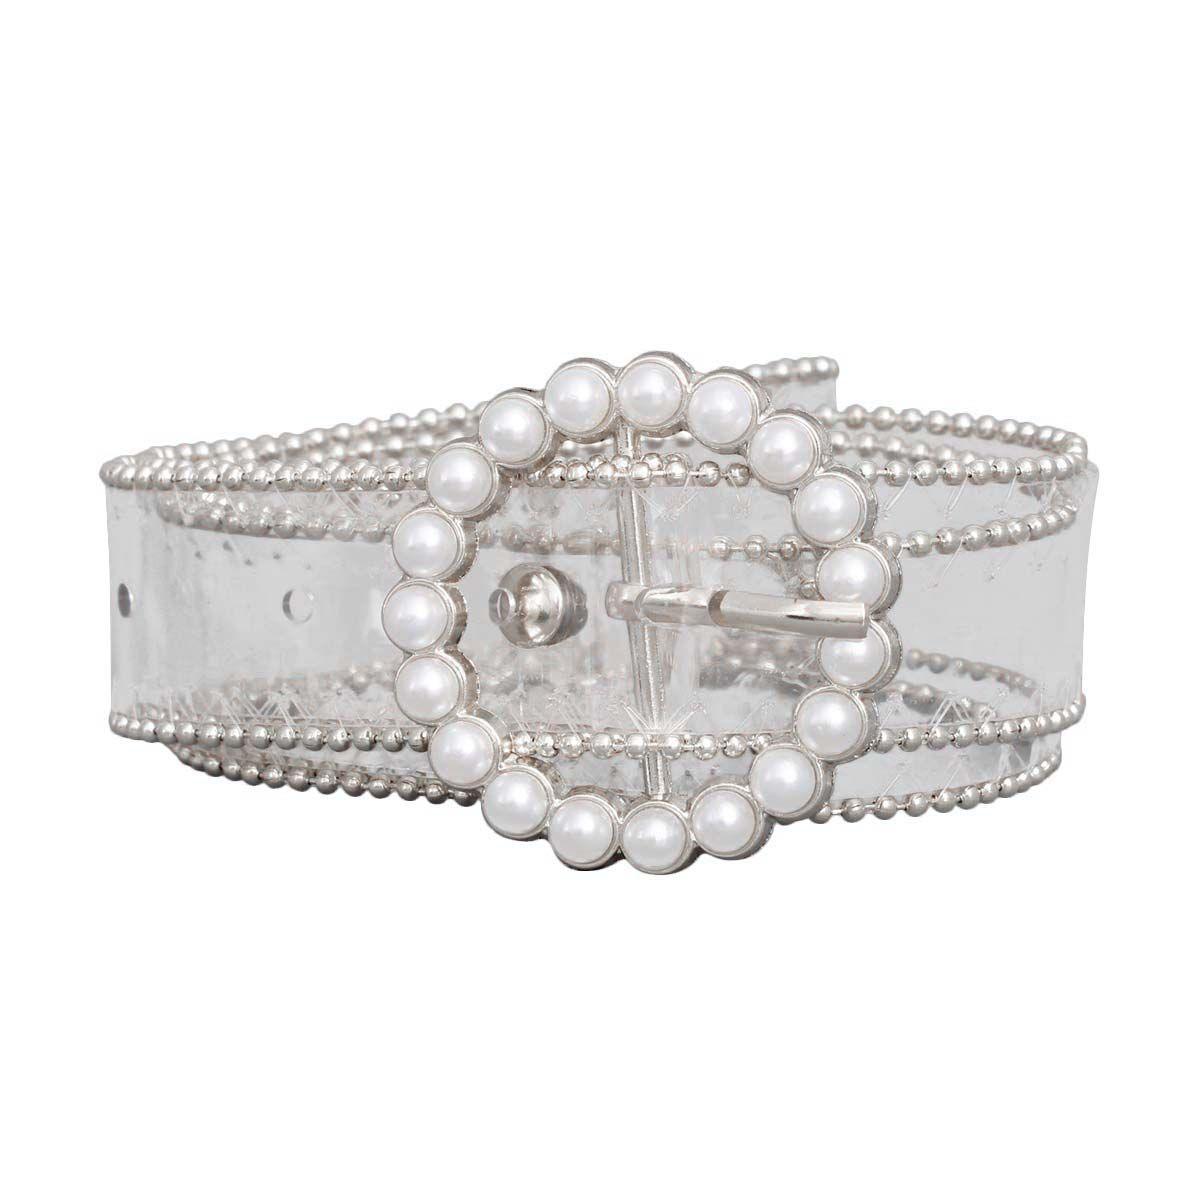 Transparent Belt Silver Tone and Pearlized Bead Embellished